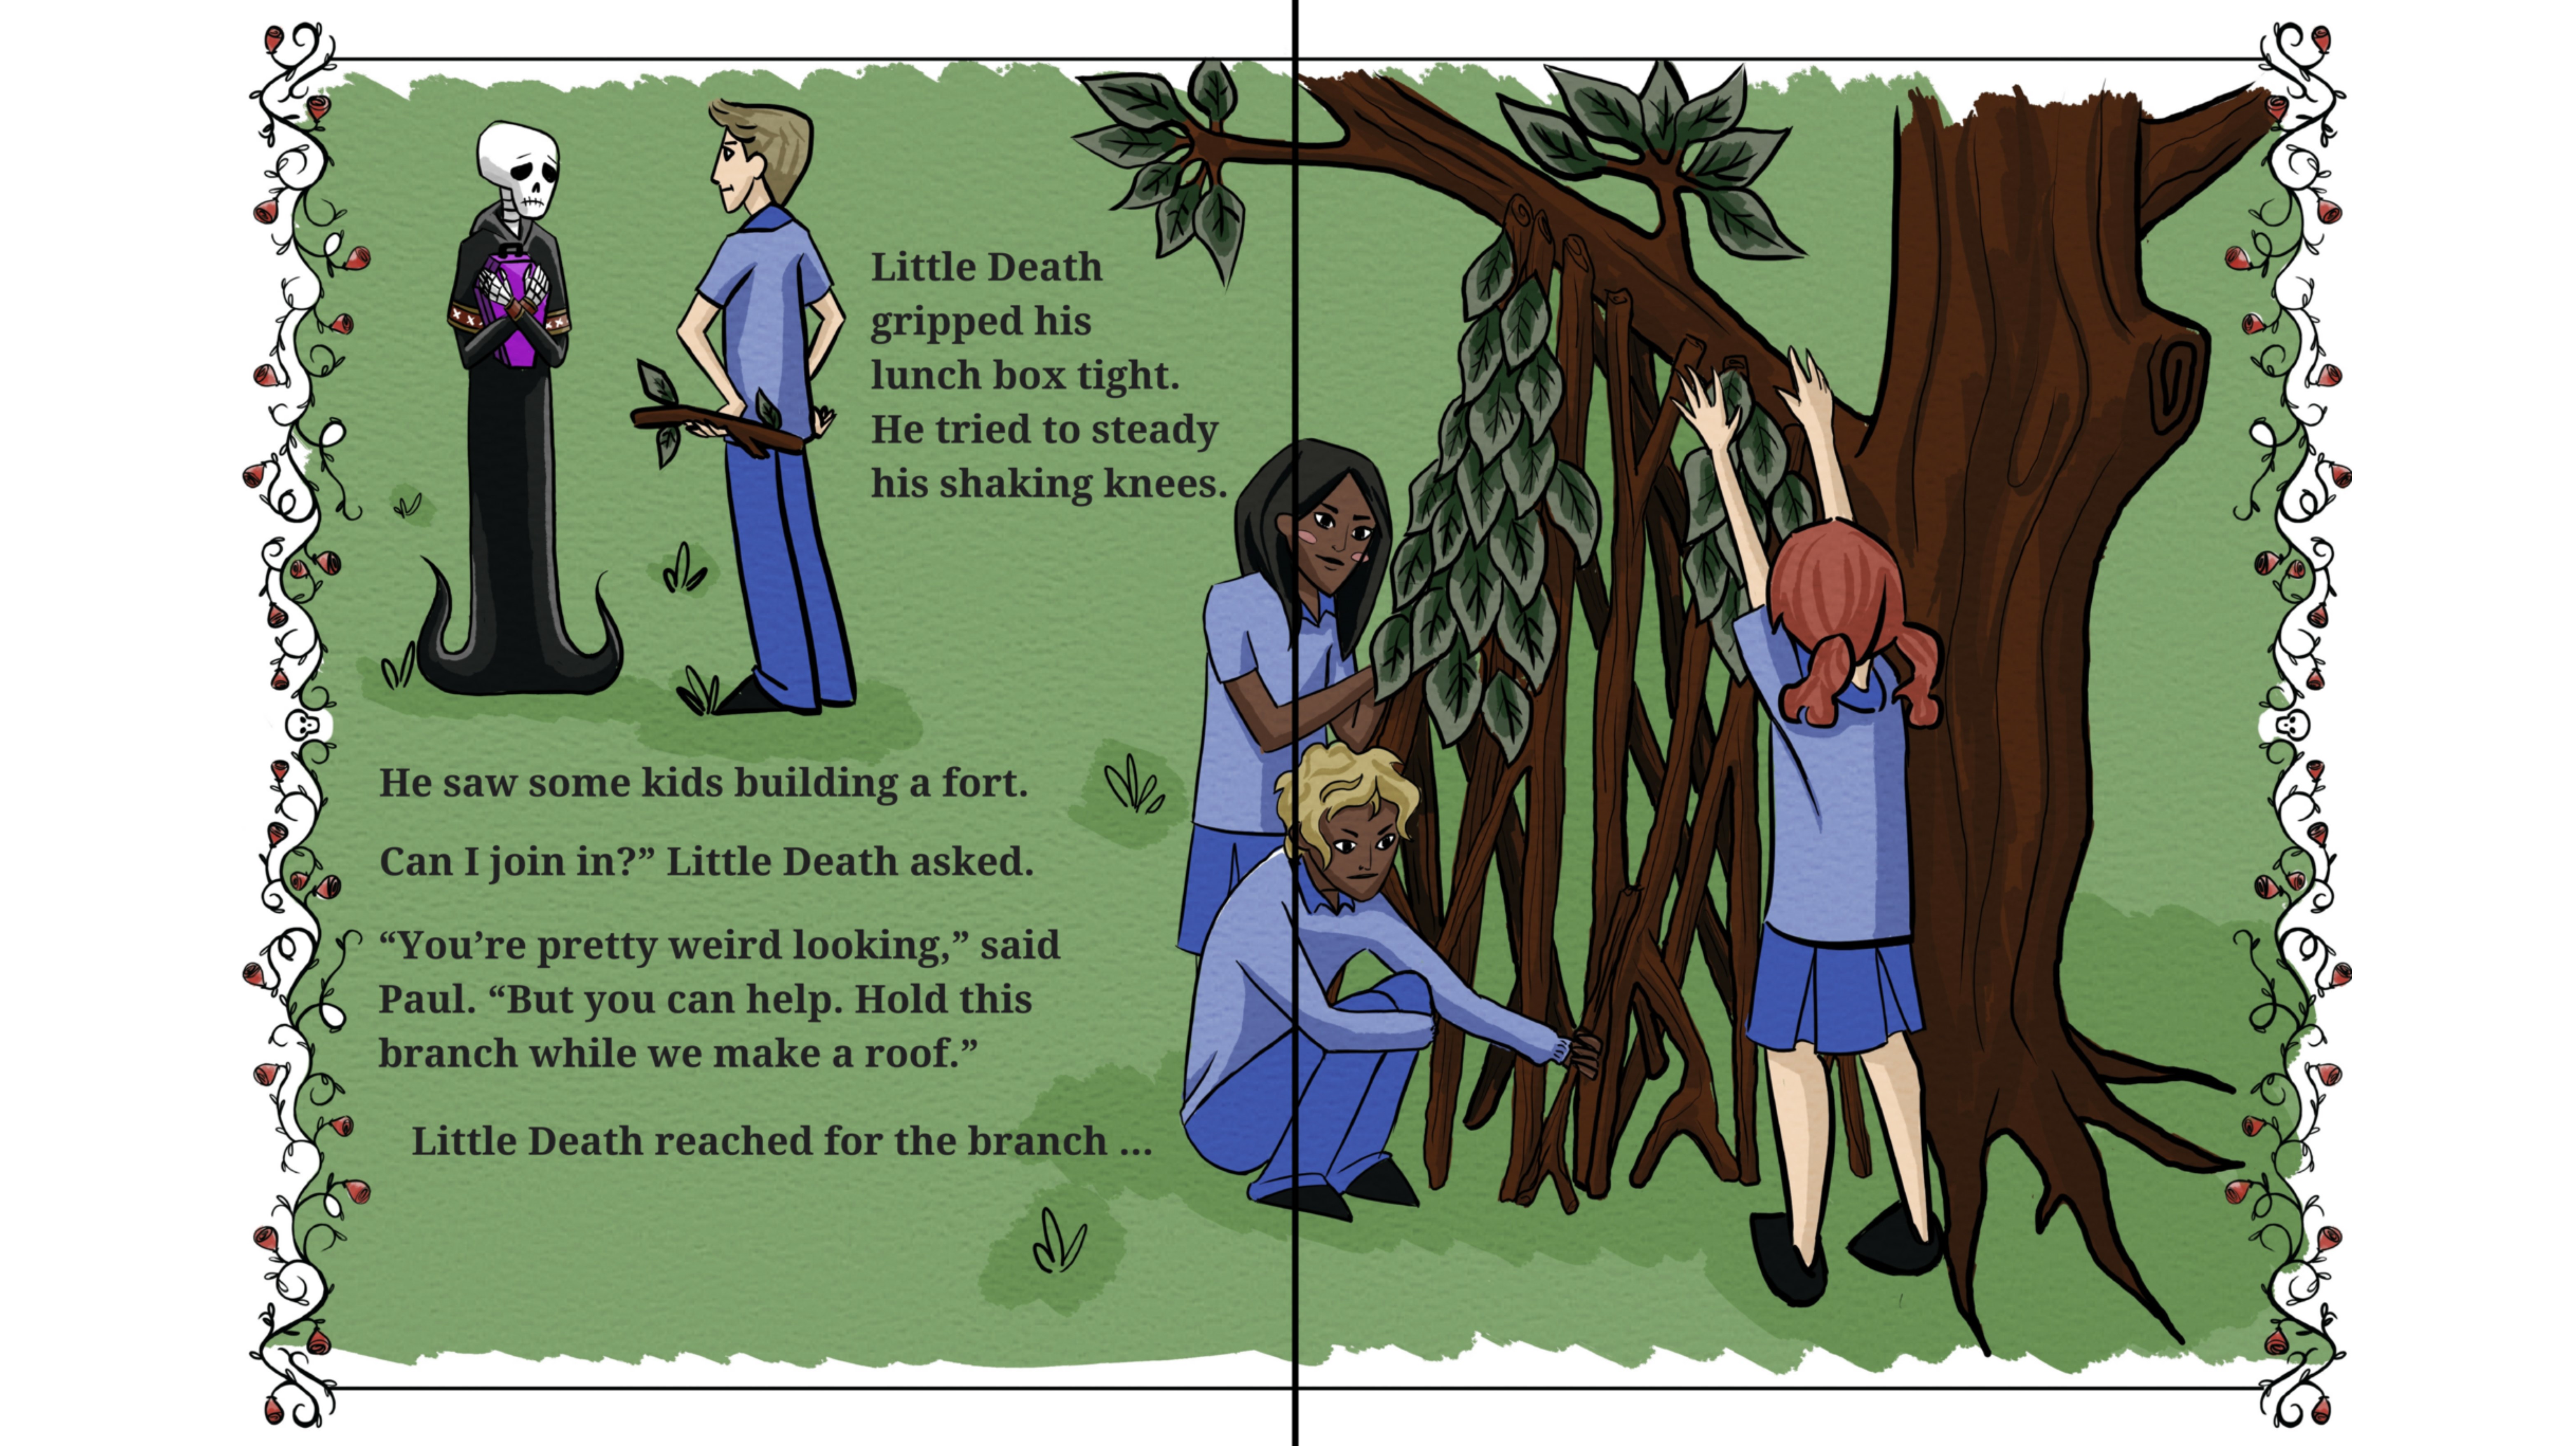 Little Death gripped his lunch box tight. He tried to steady his shaking knees. 

He saw some kids building a fort. 
Can I join in?" Little Death asked.
"You're pretty weird looking," said Paul. "But you can help. Hold this branch while we make a roof."
Little Death reached for the branch...